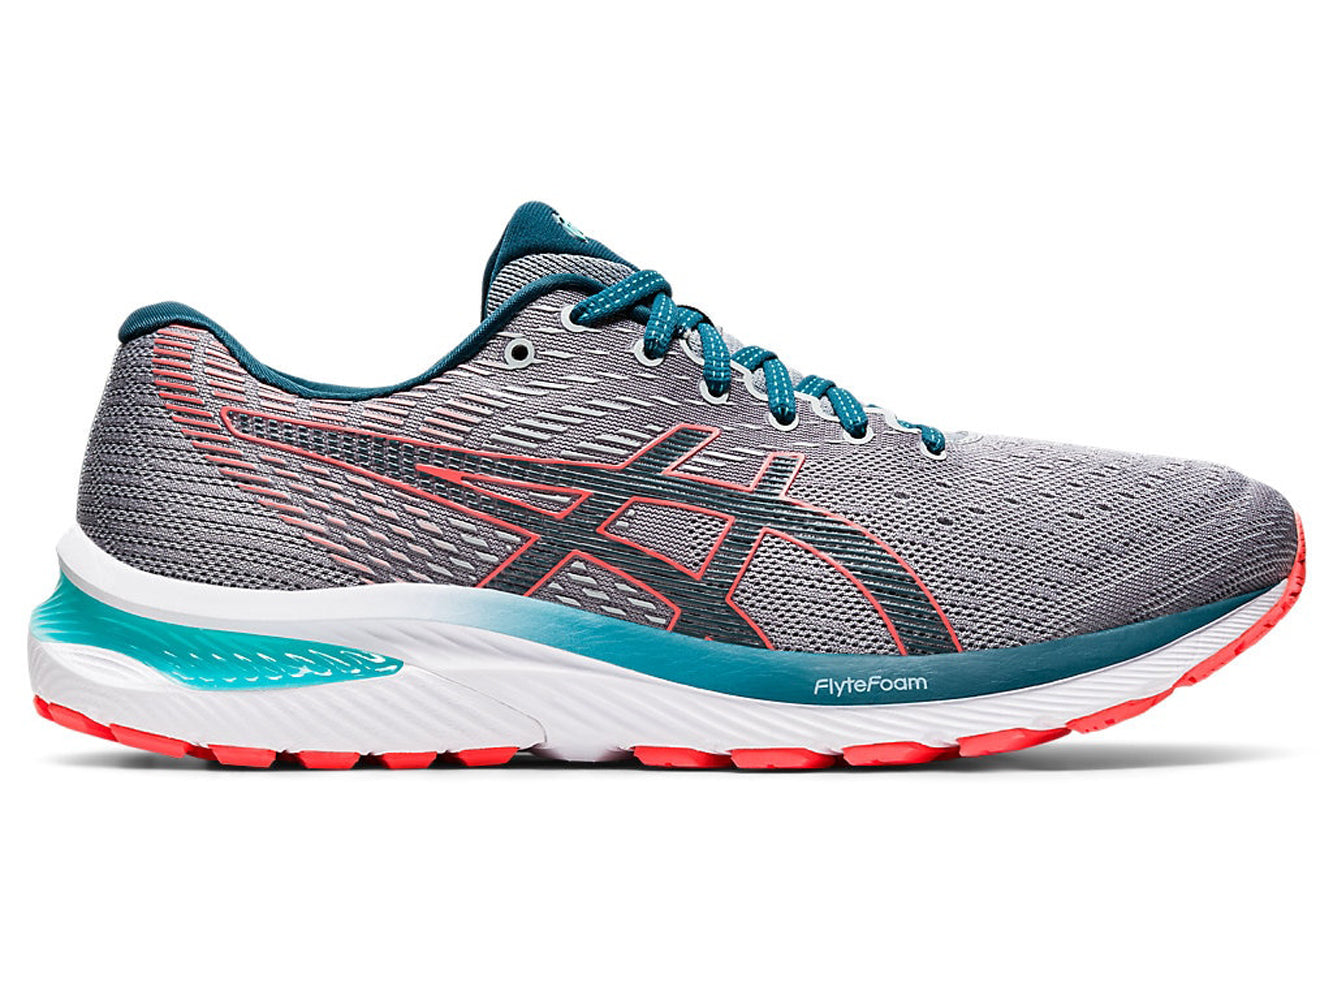 Men's Asics GEL-Cumulus 22 Running Shoe in Piedmont Grey/Magnetic Blue from the side